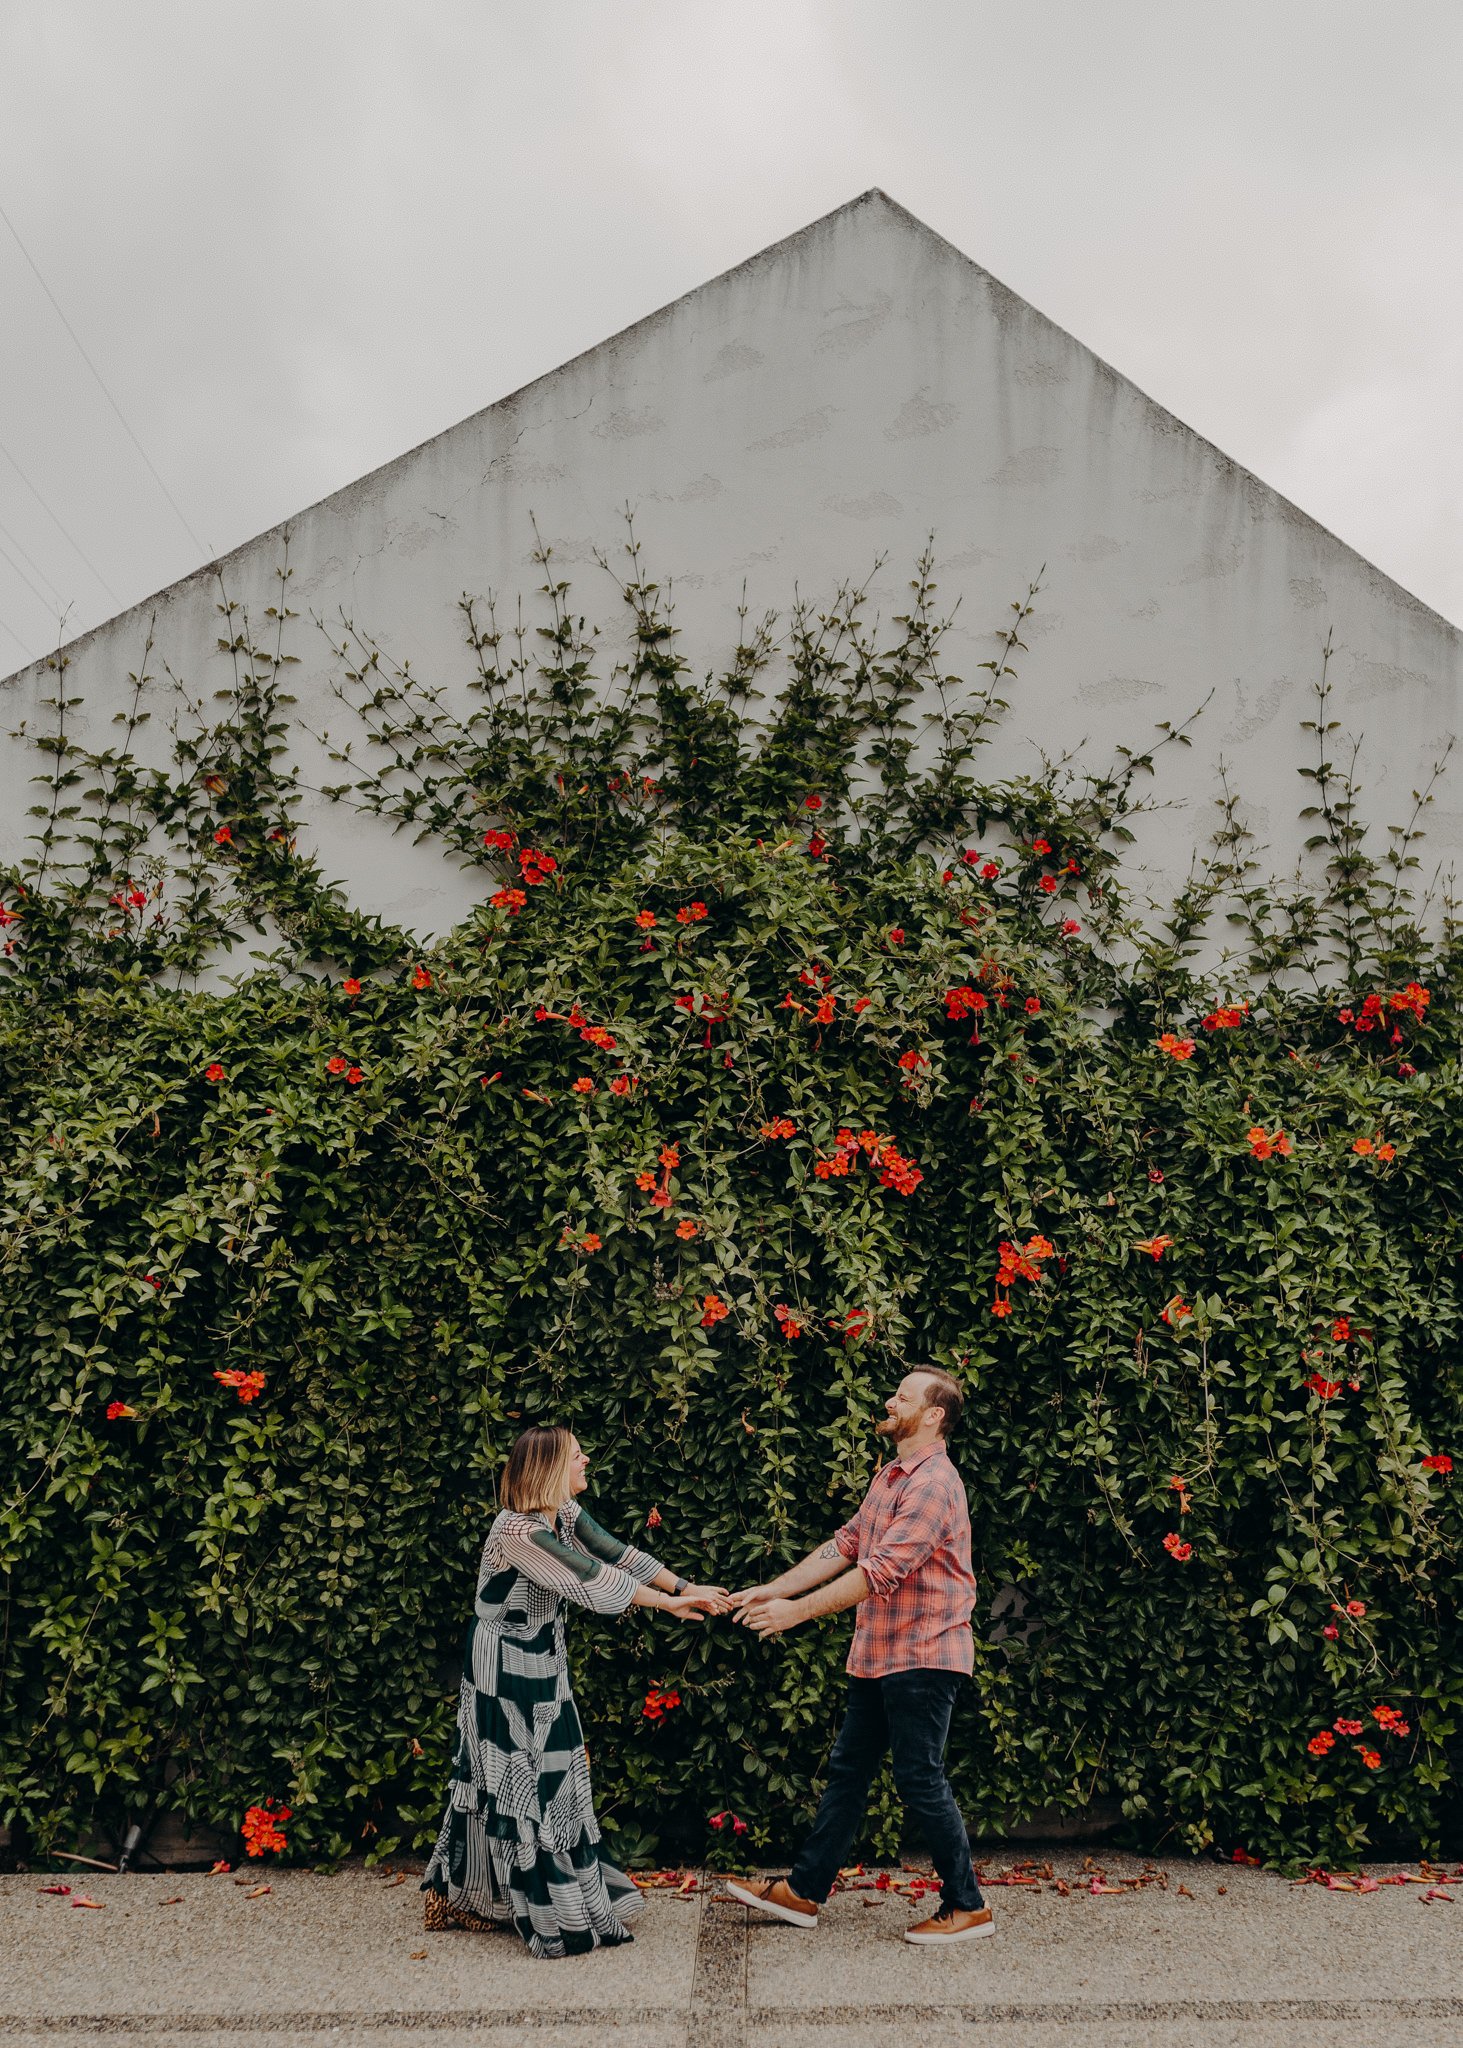 queer wedding photographers in los angeles - candid engagement session - itlaphoto.com-14.jpg